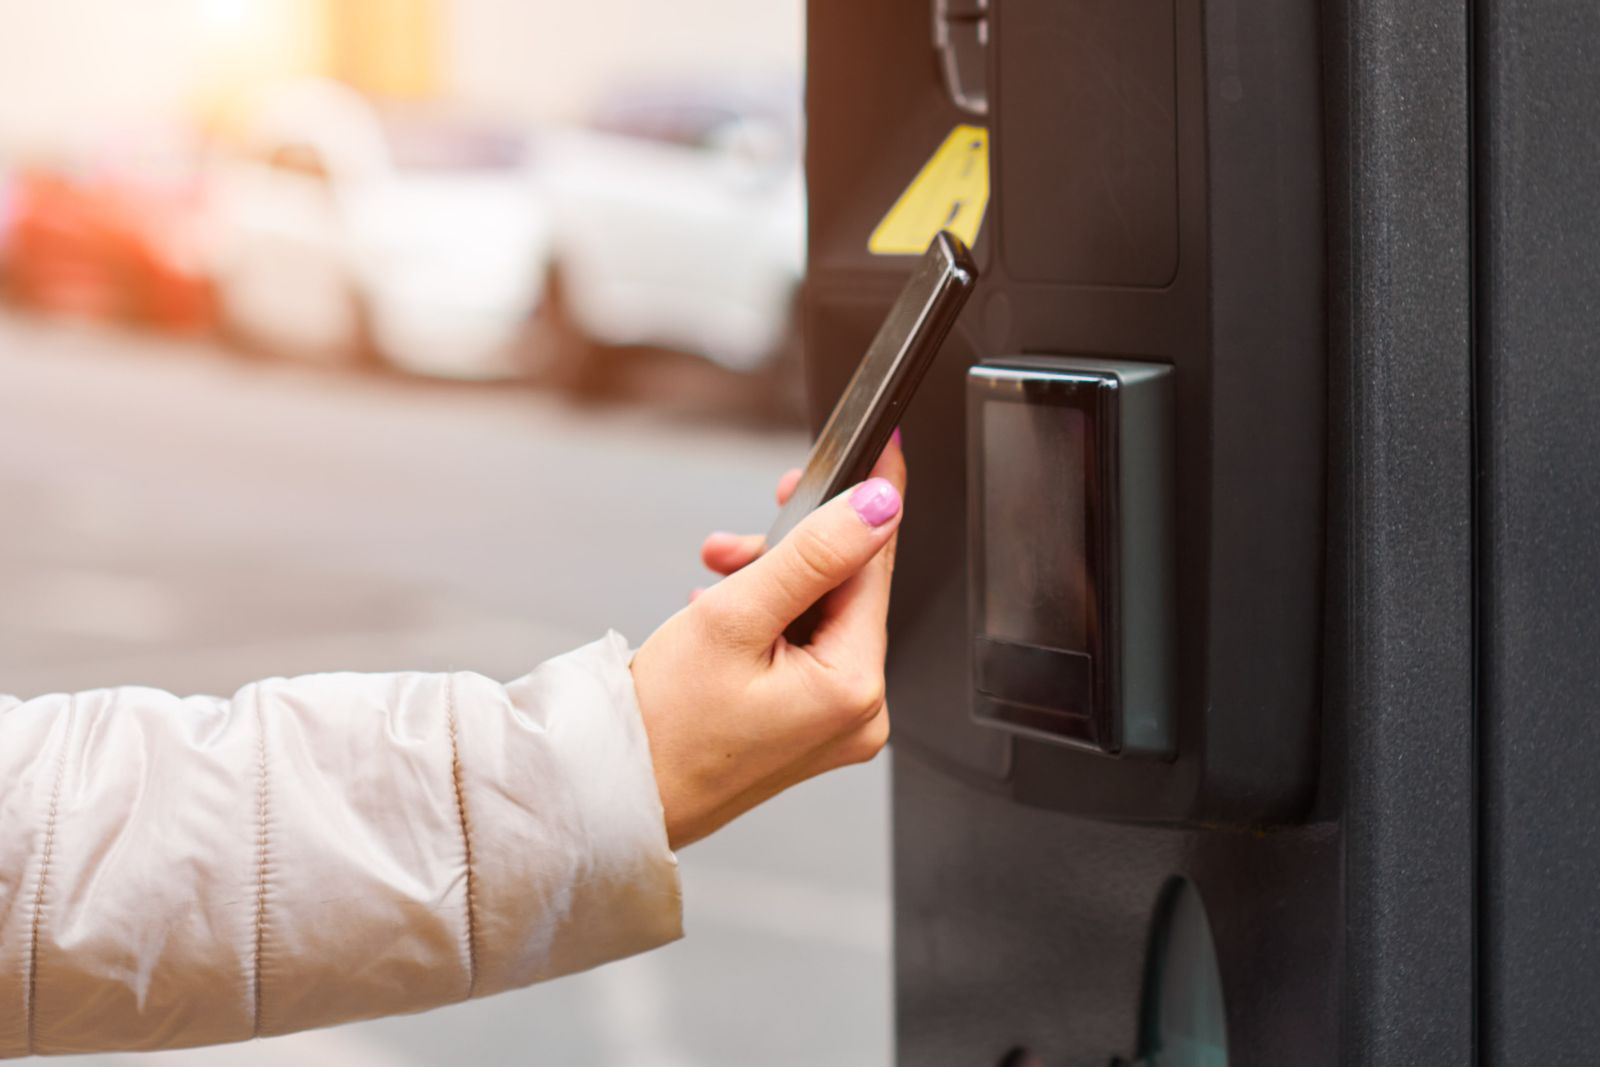 Pay Parking Fees Cashless - Image source: Shutterstock